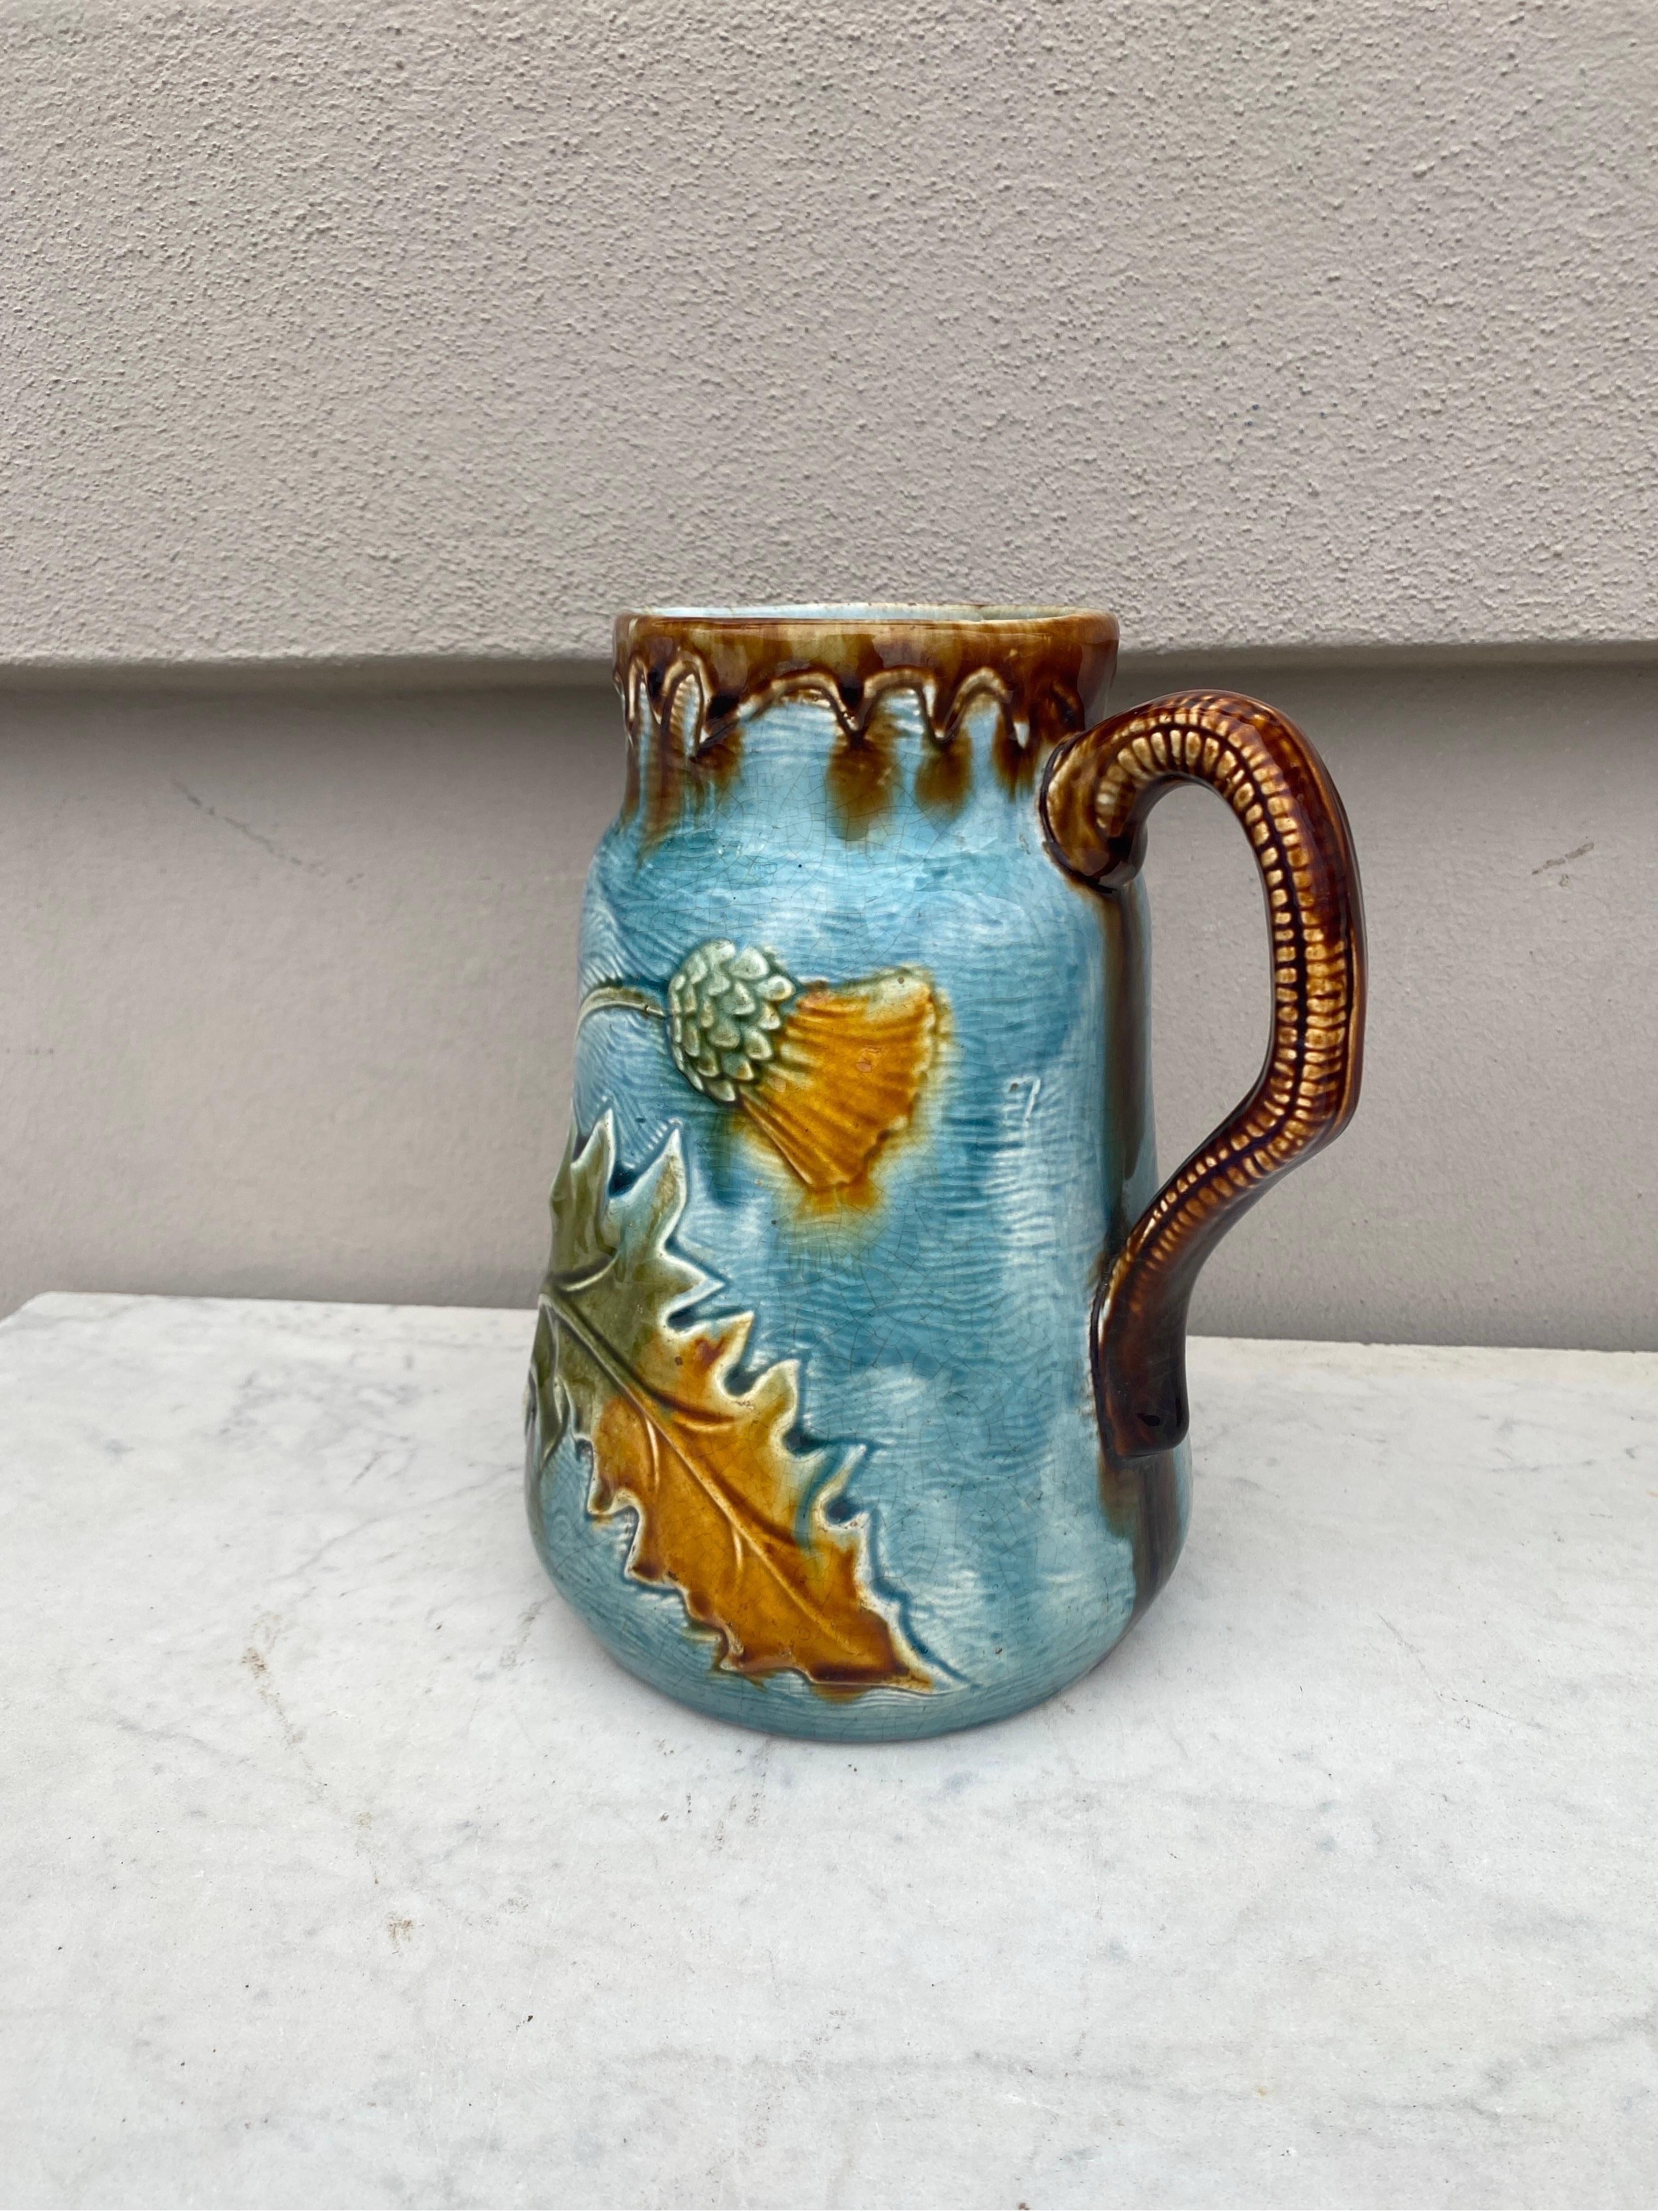 Large 19th Century Majolica Artichoke Pitcher Wasmuel In Good Condition For Sale In Austin, TX